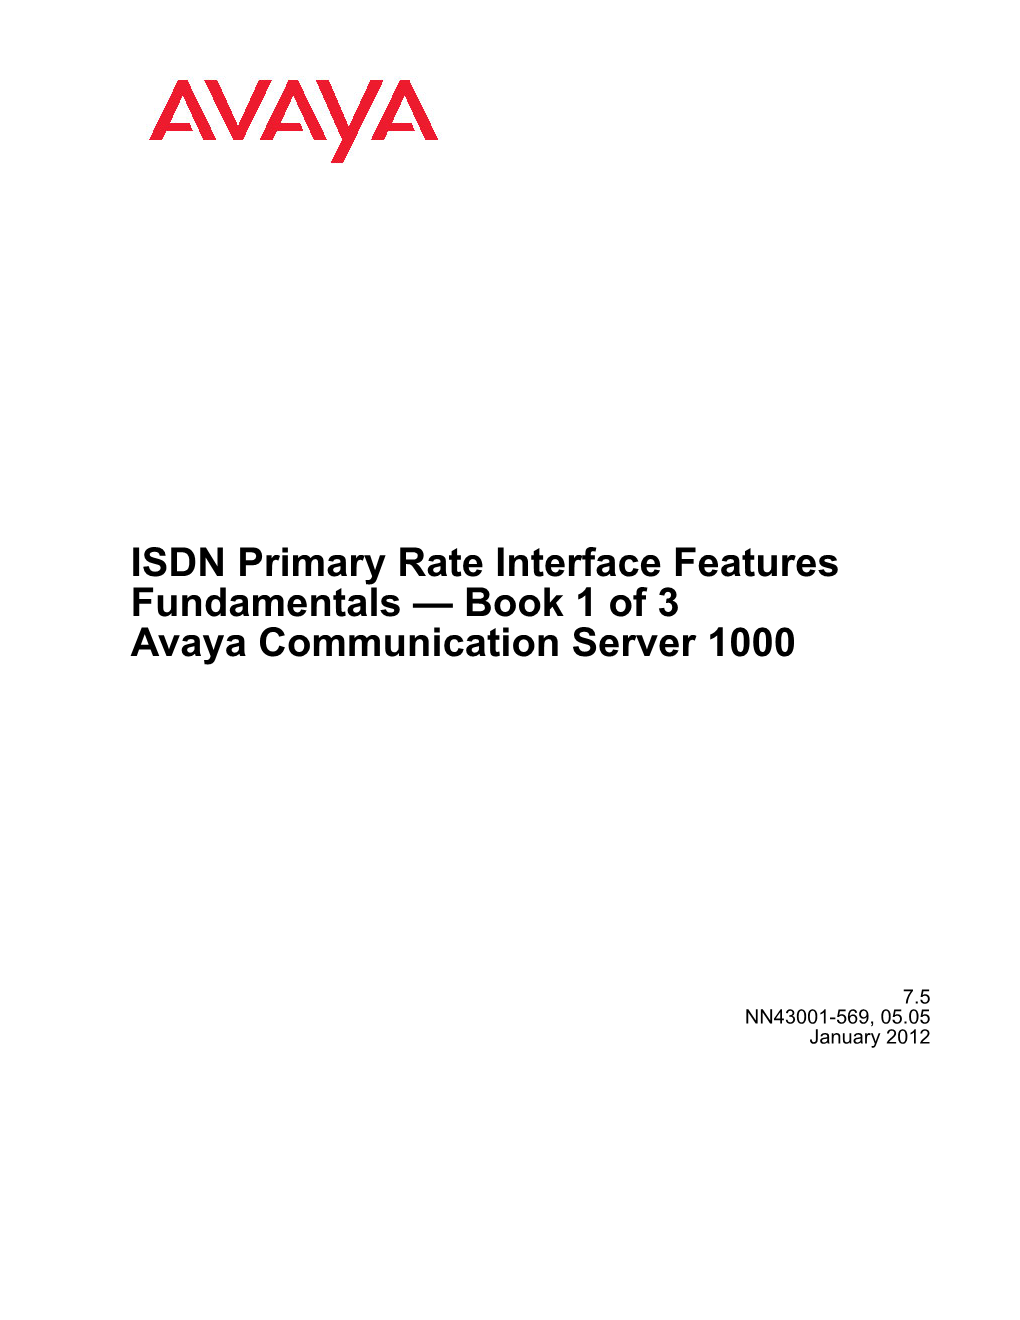 ISDN Primary Rate Interface Features Fundamentals — Book 1 of 3 Avaya Communication Server 1000